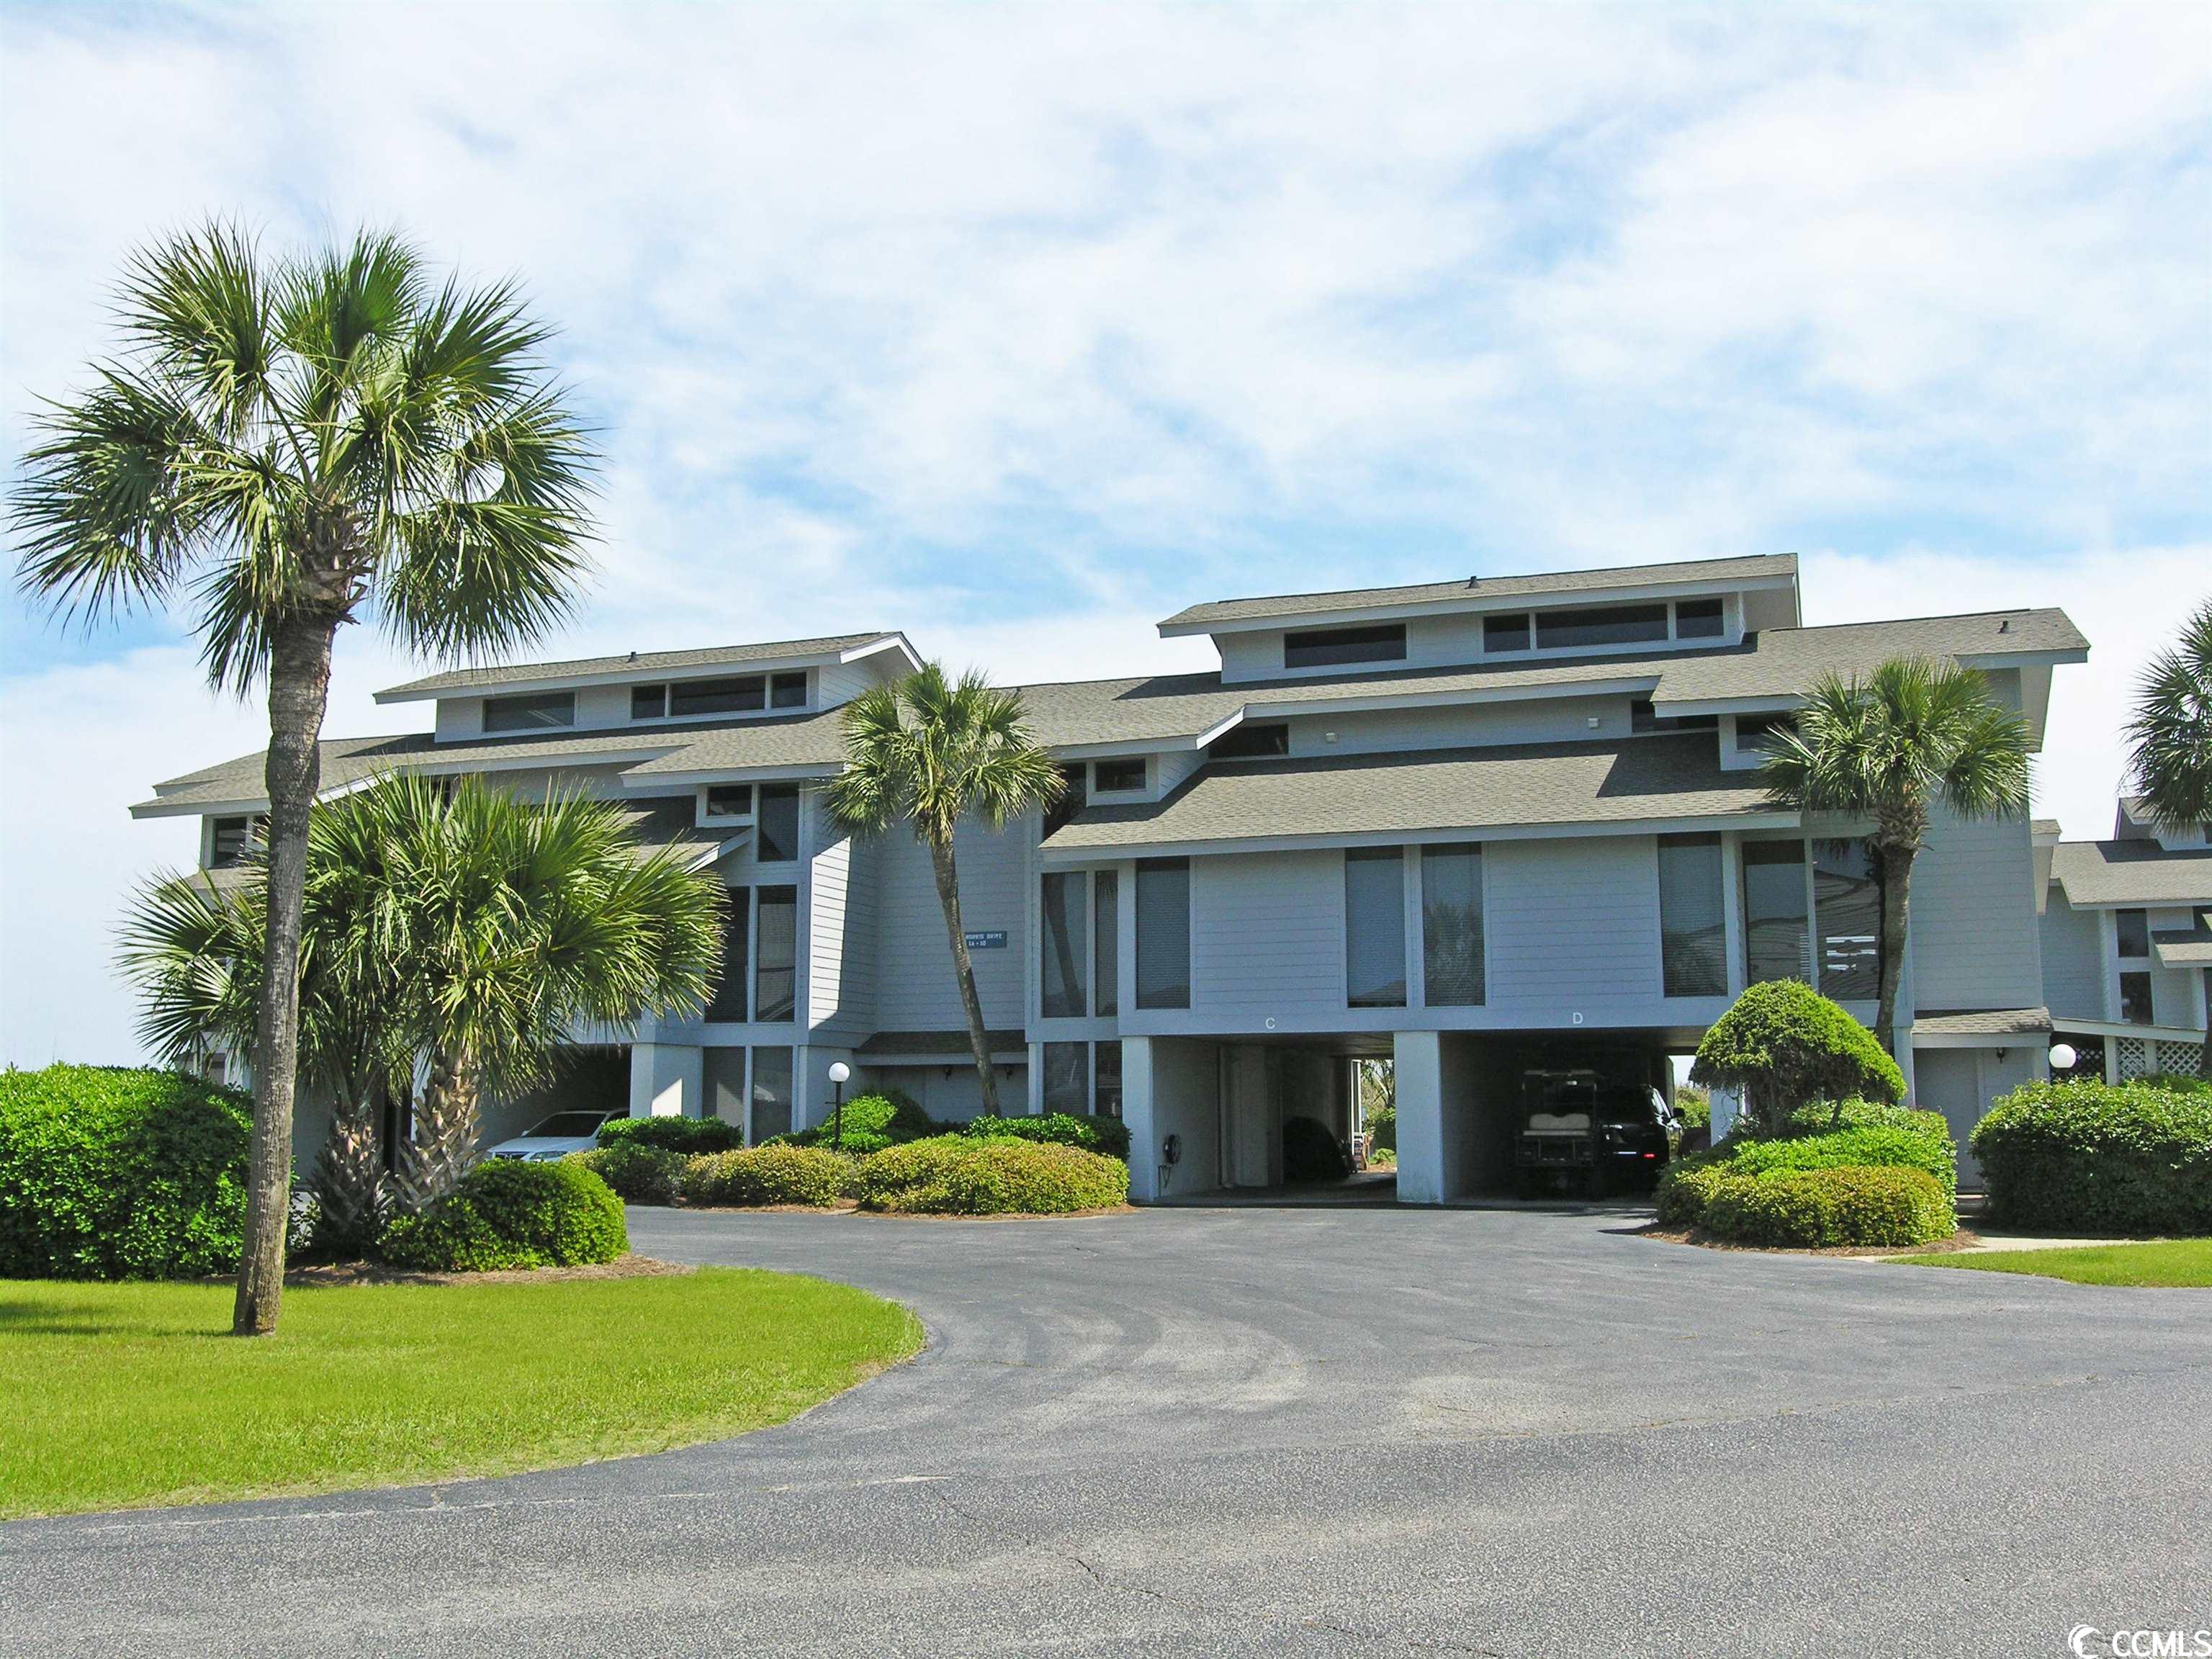 enjoy the vacation of a lifetime by sharing the cost of a coastal lifestyle through interval ownership. inlet point 2-c provides deeded ownership of 4 weeks per year (1wk/season) for each interval. turn day is monday. located within a gated community uniquely located on a peninsula bounded by the atlantic and a tidal salt marsh creek. magnificent ocean views, lowcountry decor and oak floors give this condo a seaside cottage charm. main floor common areas open to a sundeck and screened porch. additional features include electric log set fireplace, fully equipped kitchen, impeccable weekly housekeeping, ceiling fans throughout, covered parking and outside storage. owners may have one dog and can rent their weeks. no smoking. this 3-story condo has bedrooms on every floor. two on the top floor are en suite - one has a queen, the other has a king and oceanfront screened balcony. the main floor has one bedroom with a queen and full bath. the "no stairs" ground floor has one en suite bedroom with twins and patio walkout. amenities include private beach access, two community pools (1 olympic), hot tub, creek dock, and 24-hour guarded security gate. this property is an interval ownership.